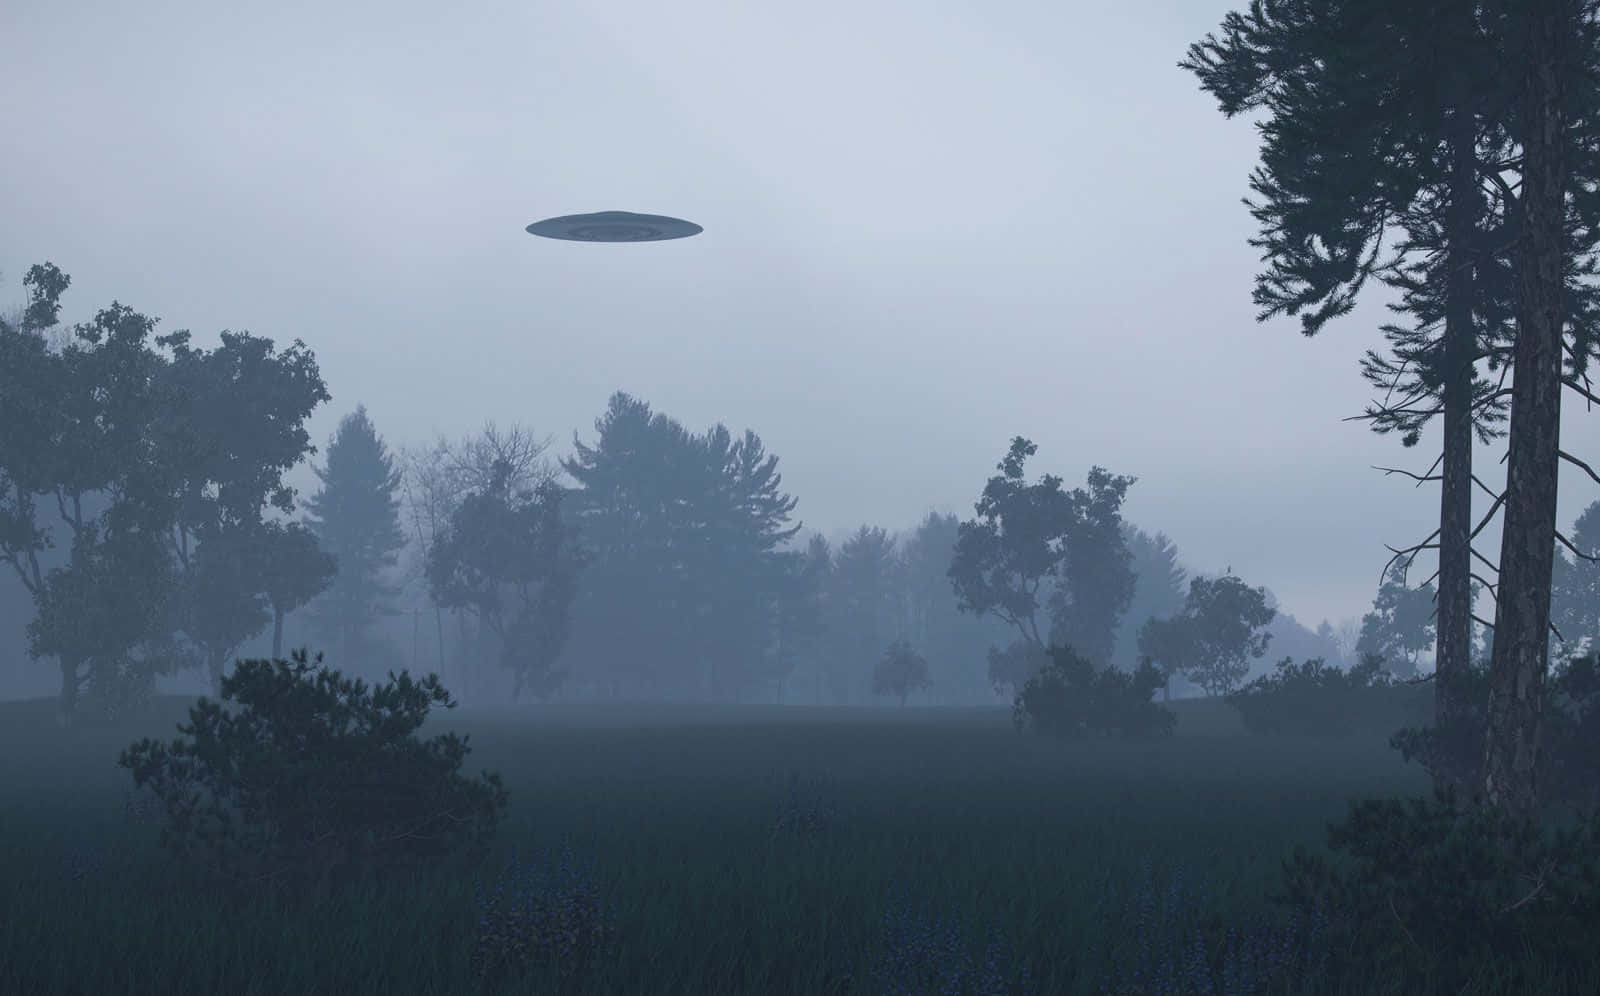 Mysterious UFO over North America